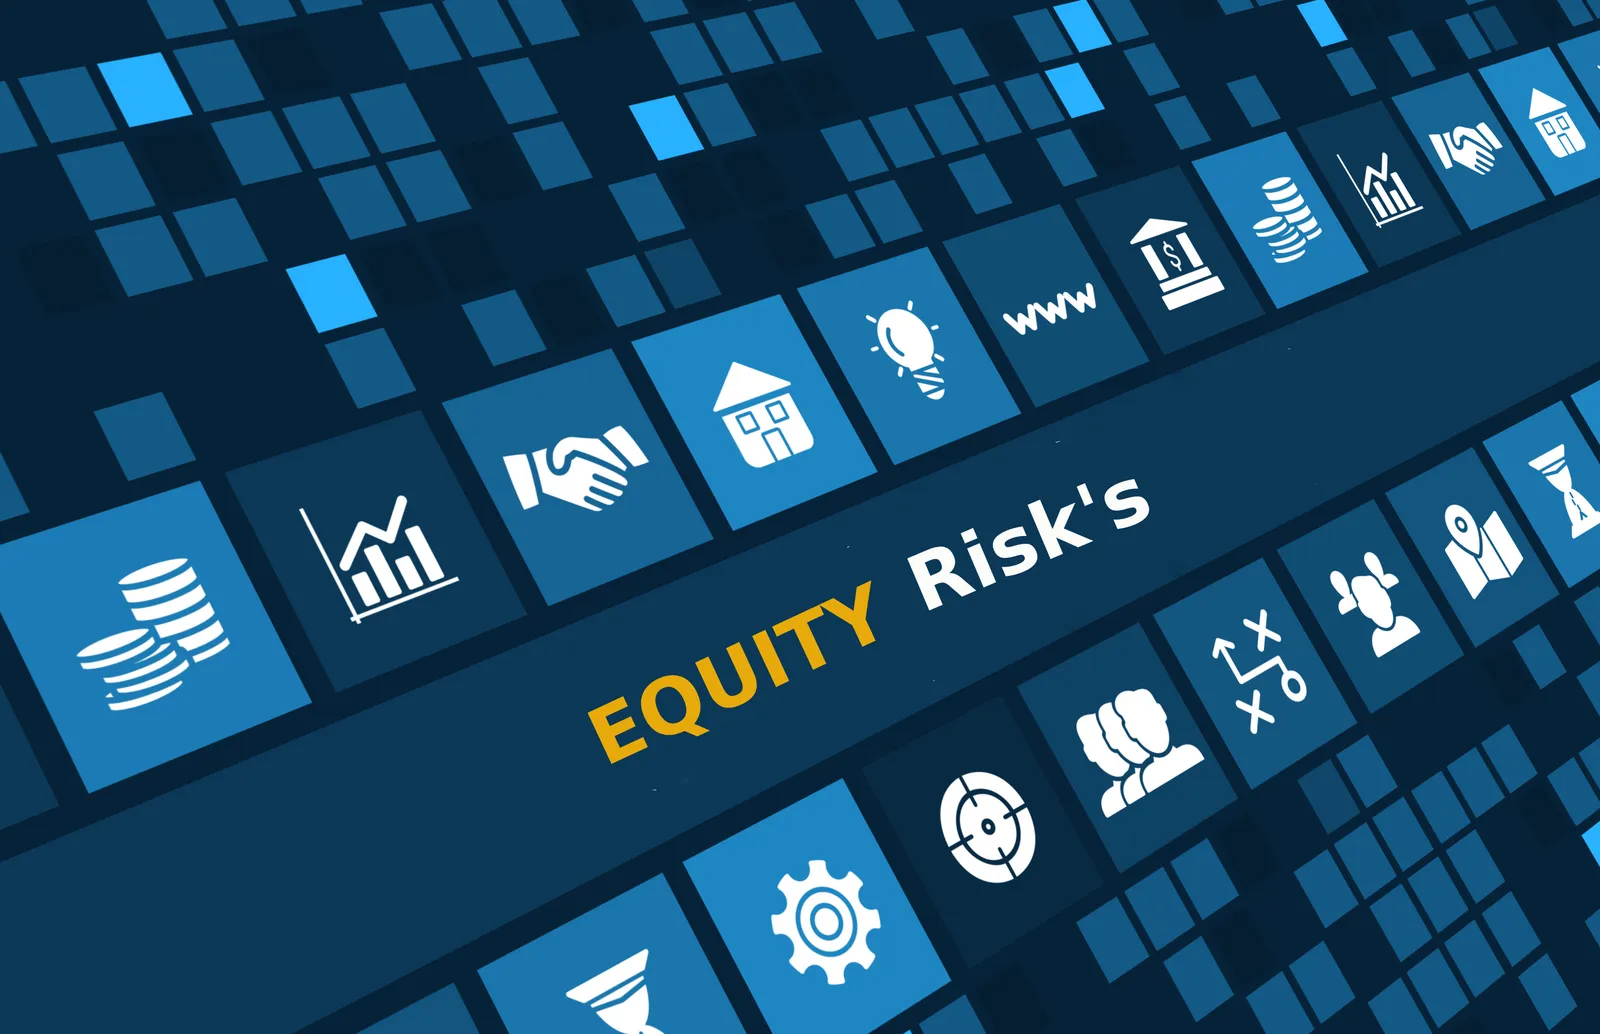  Equity Risks one needs to be aware of while Investing